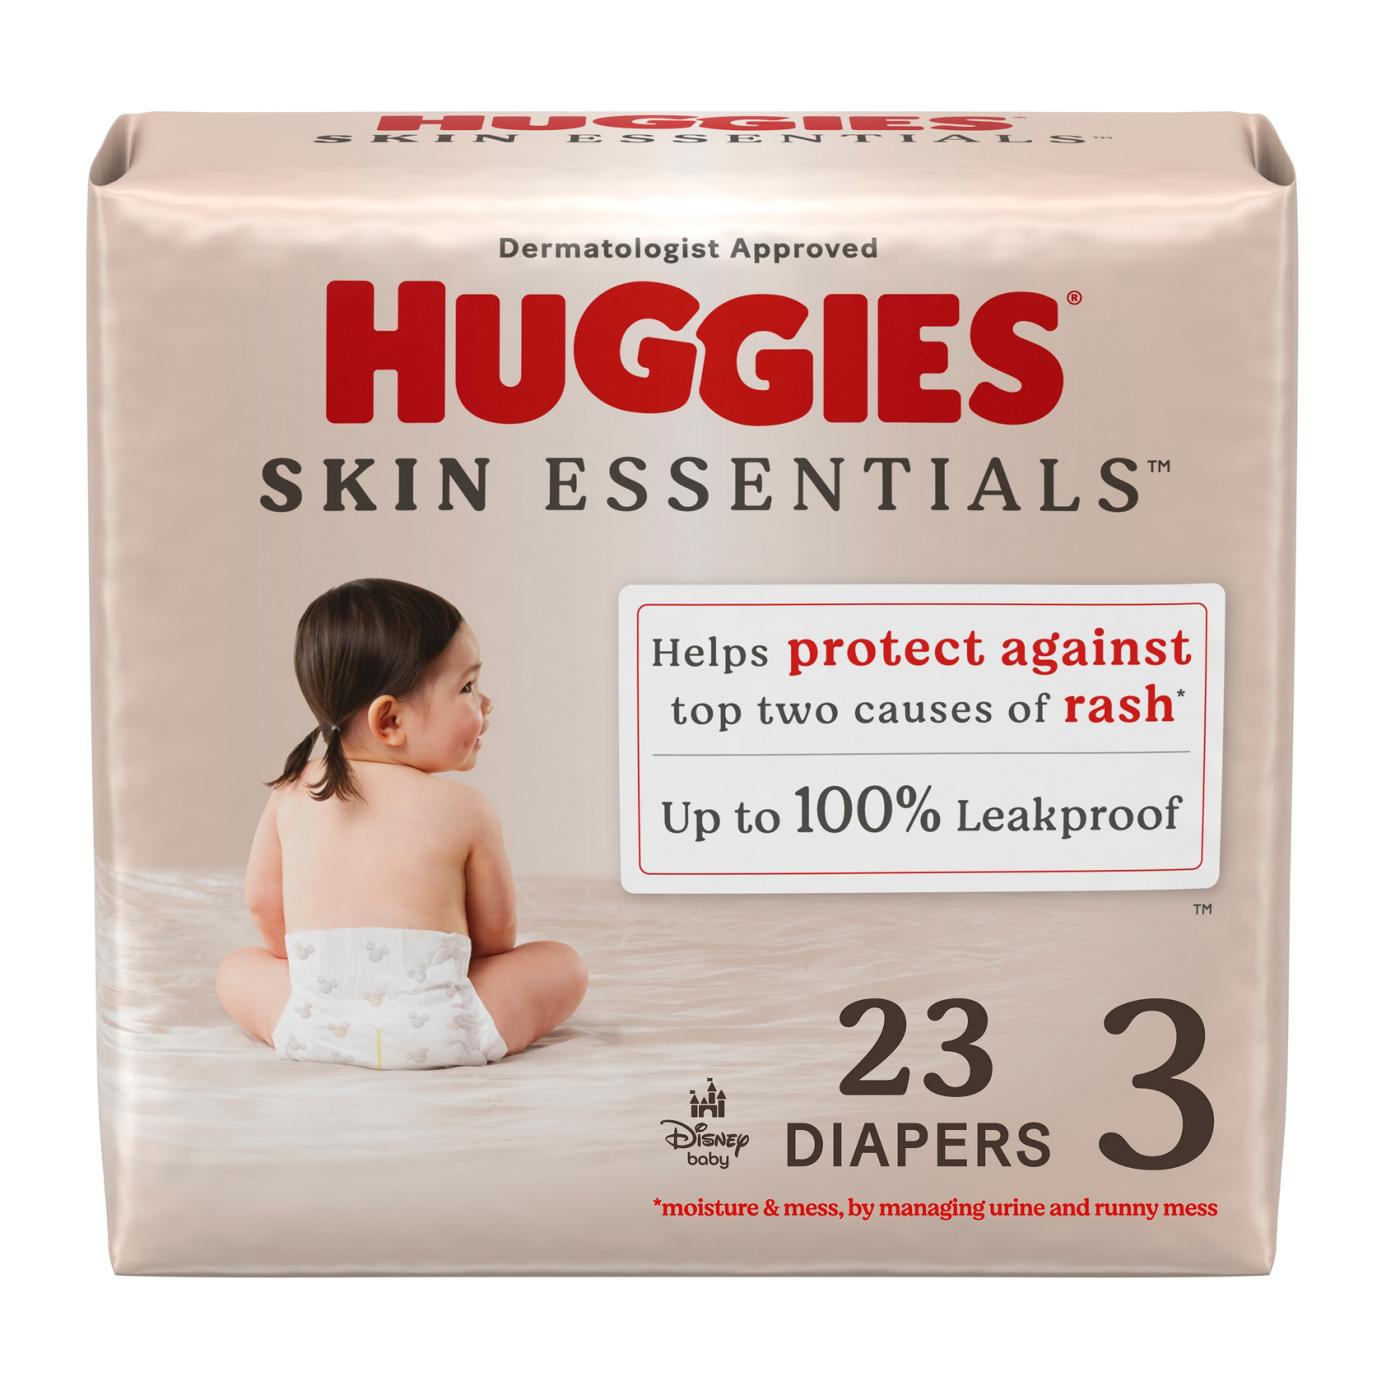 Huggies Skin Essentials Baby Diapers - Size 3; image 1 of 4